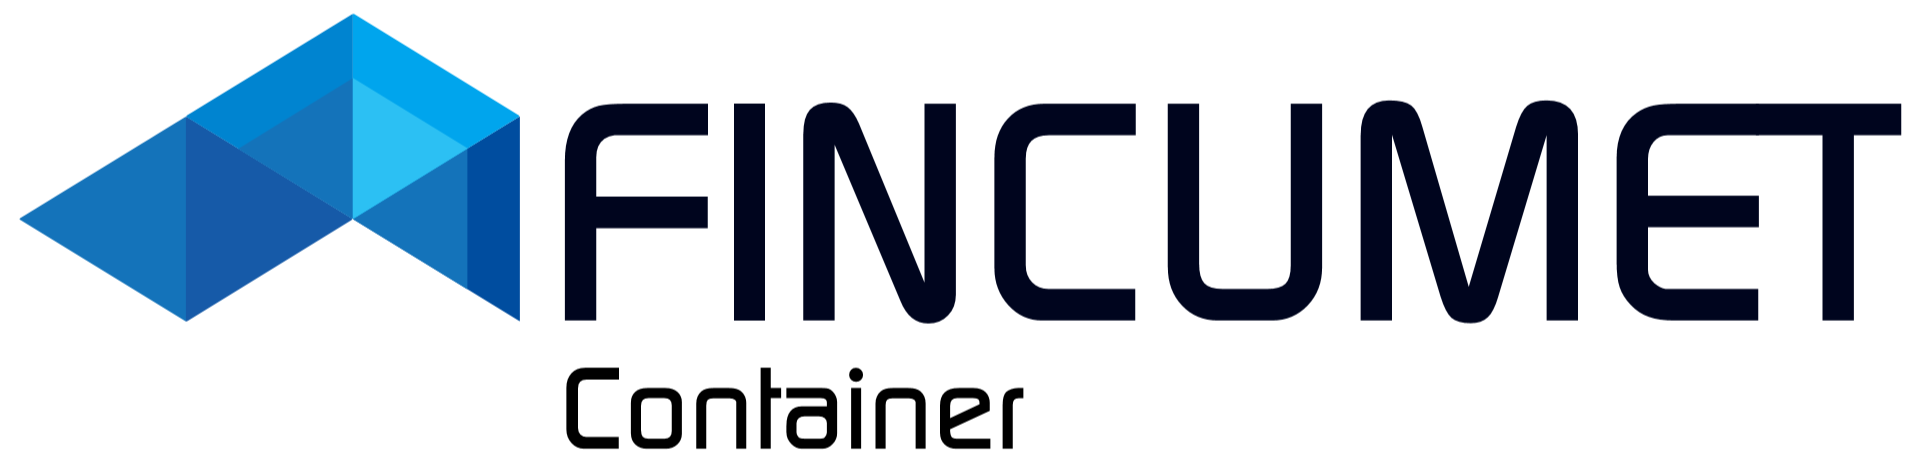 Container_logo_png